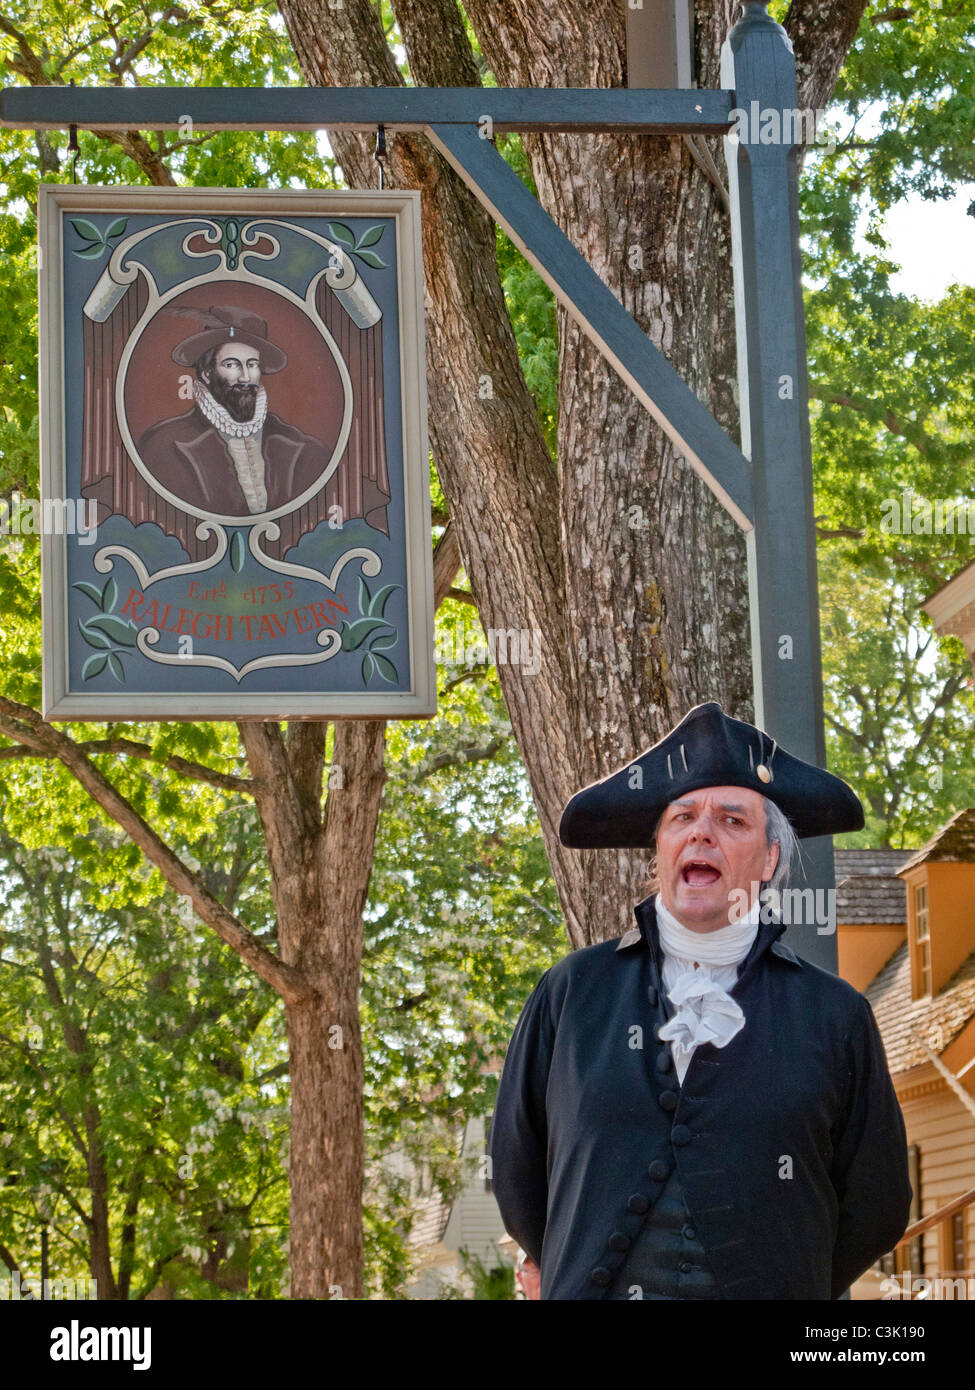 An actor portraying George Washington delivers a speech outside the Raleigh Tavern in Colonial Williamsburg, VA. Stock Photo